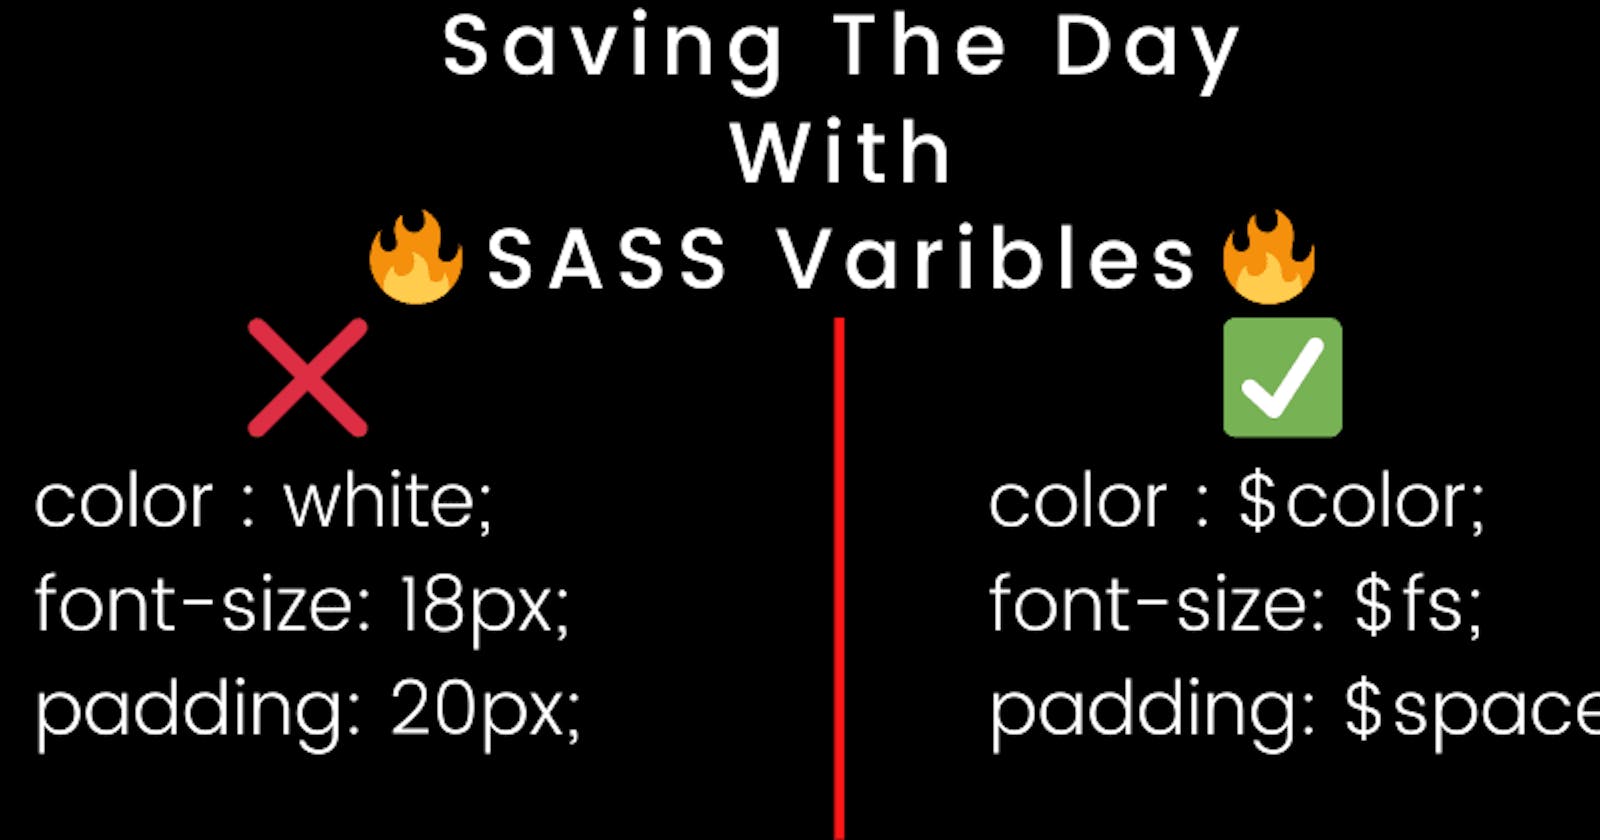 Deploy SCSS Variables & Save Everyday from Today🔥